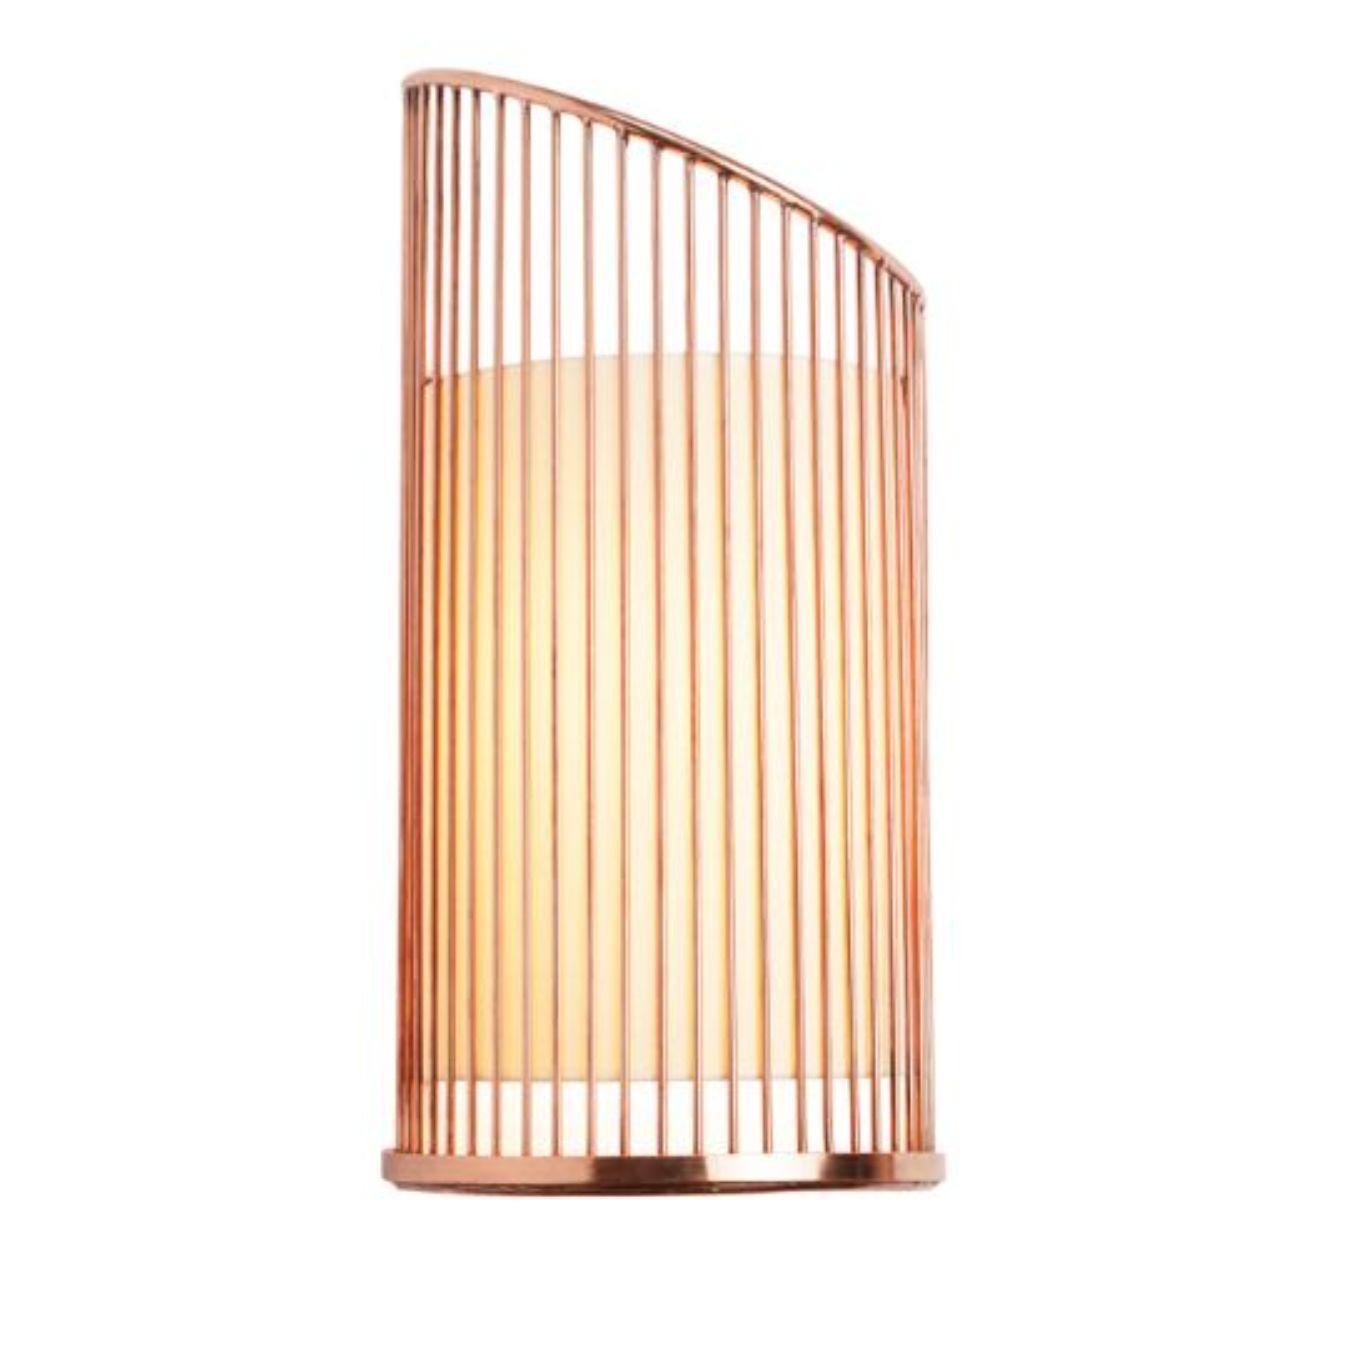 Portuguese Salmon New Spider Wall Lamp with Copper Ring by Dooq For Sale